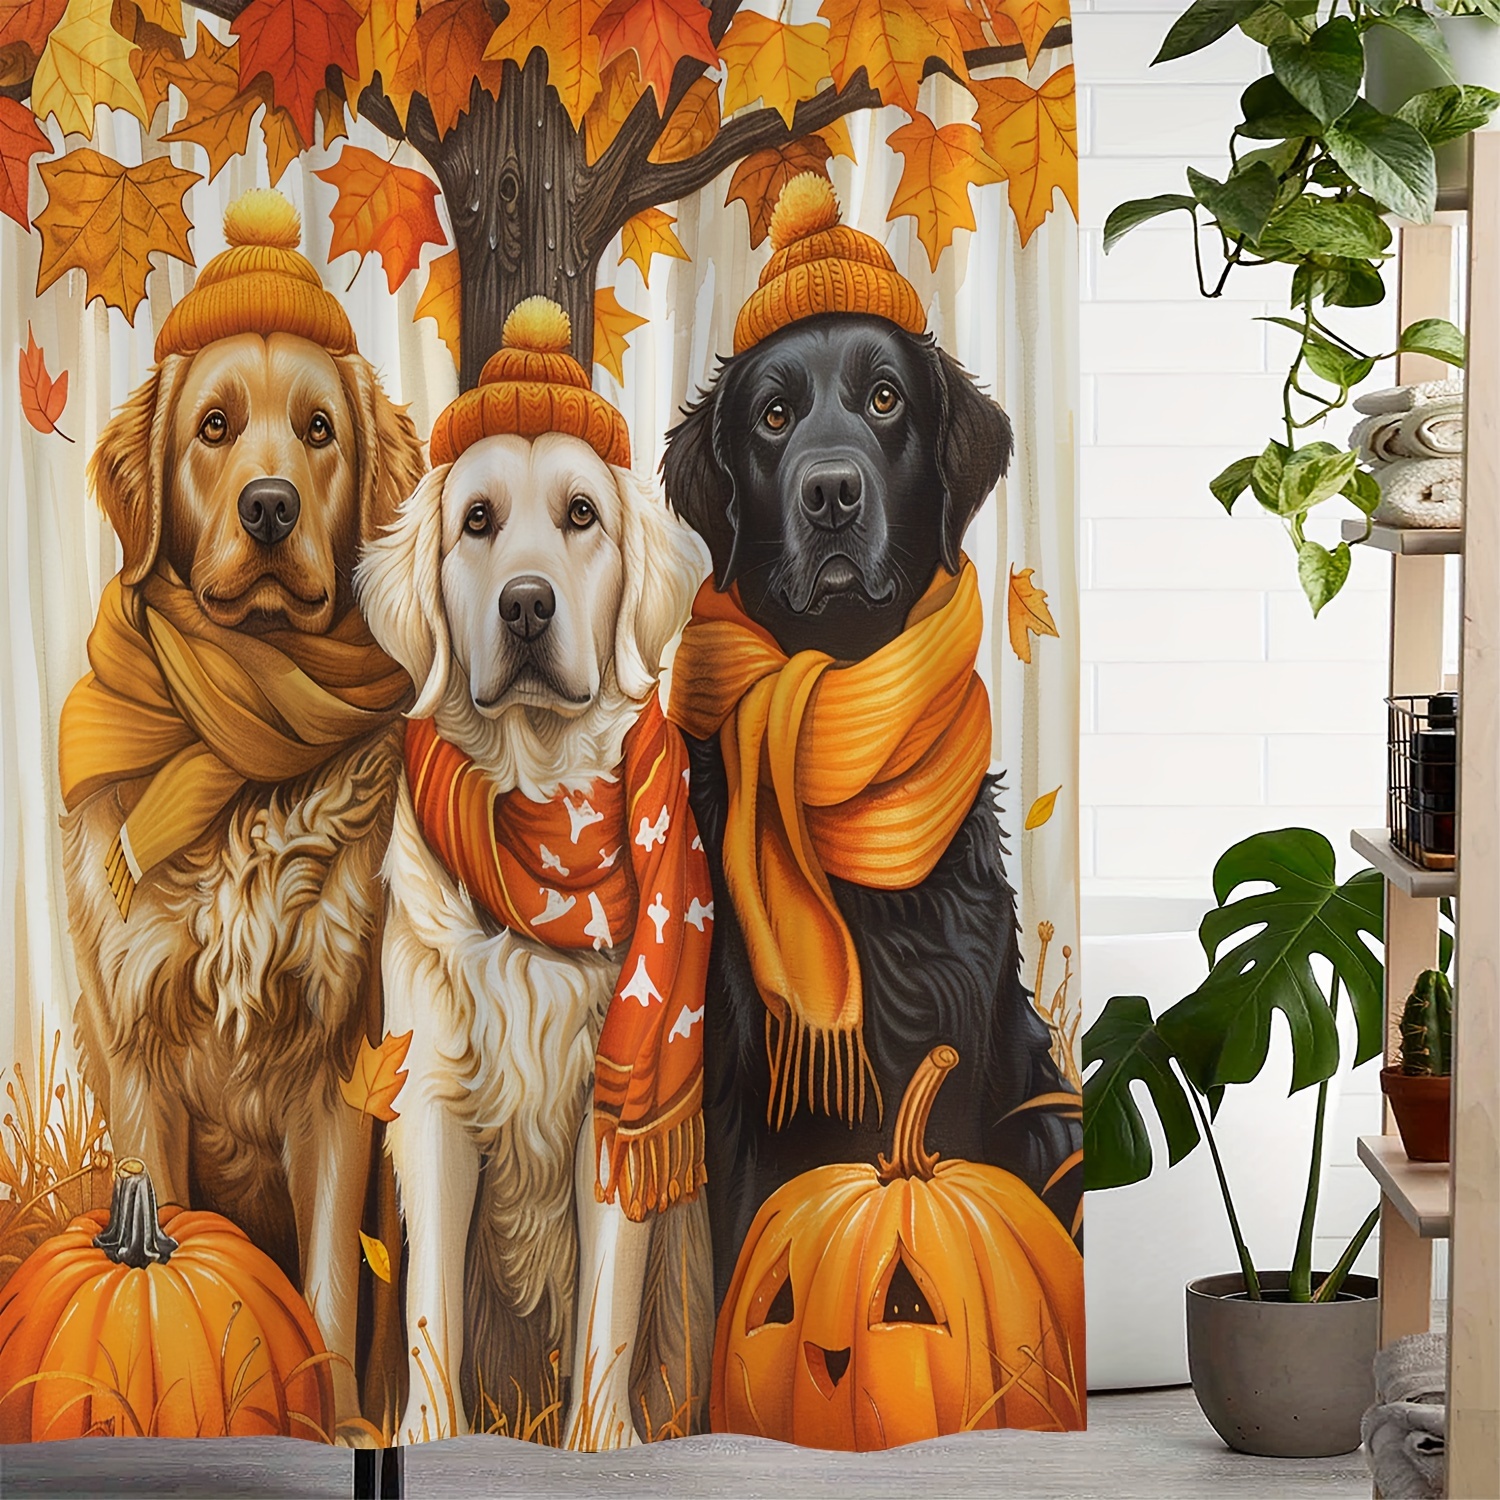 

Autumn Canine & Maple Leaf Pumpkin Print Waterproof Shower Curtain, Artsy Polyester Fabric, Machine Washable With 12 Hooks Included, Water-resistant Vintage Style Decor Curtain For Bathroom & Windows